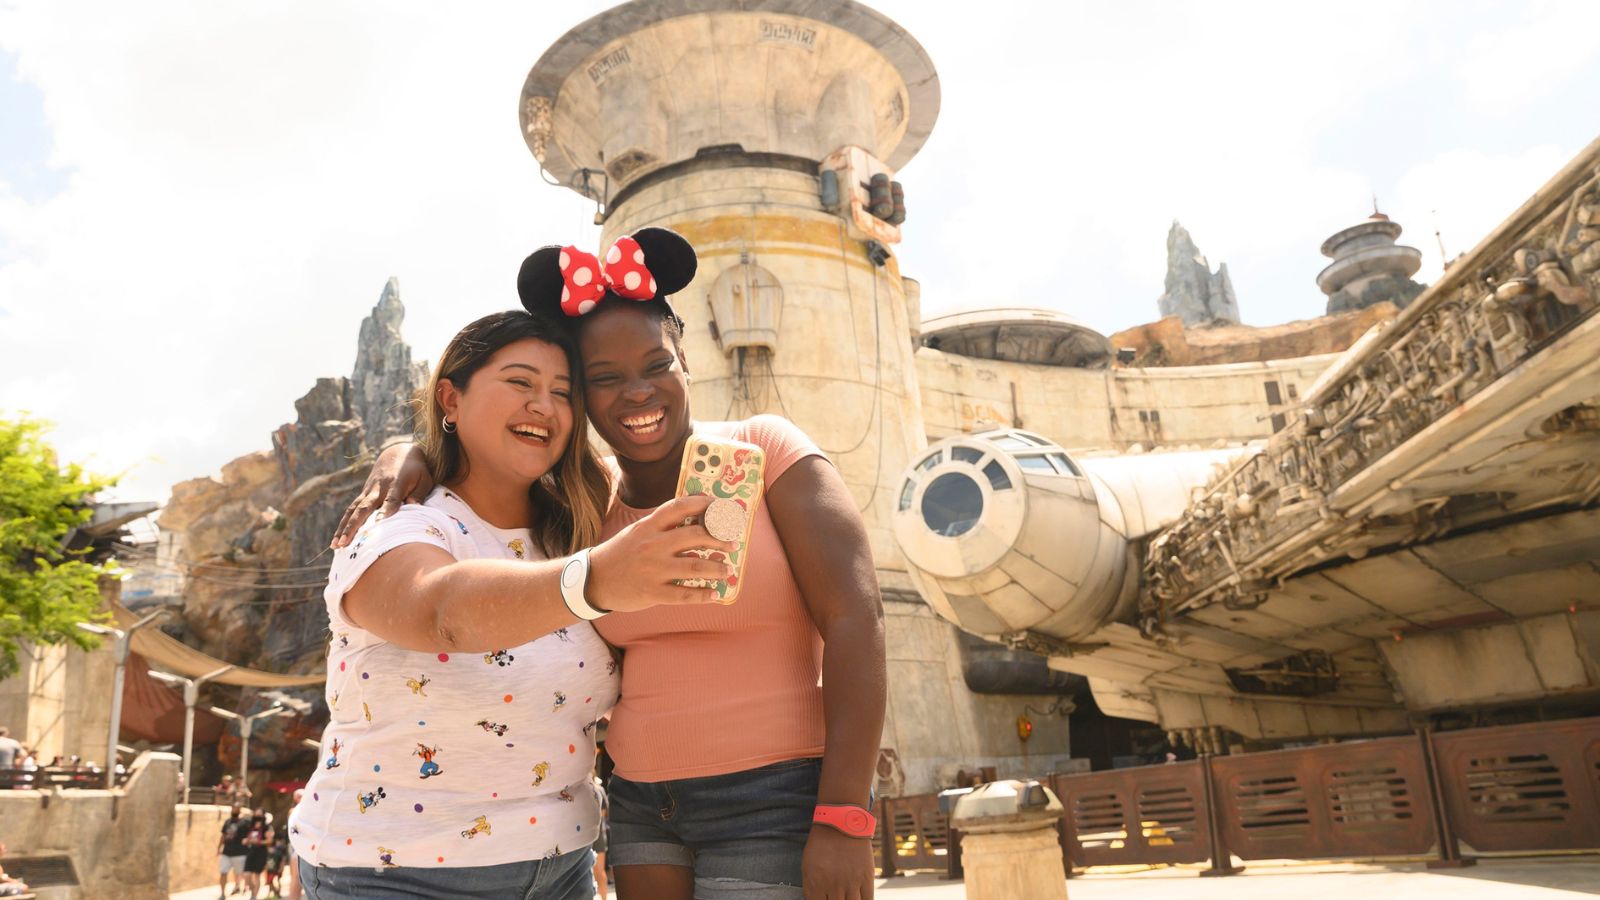 Vacationing at Walt Disney World Resort as an adult is a chance for guests to experience Disney through new eyes (Photo: Disney)